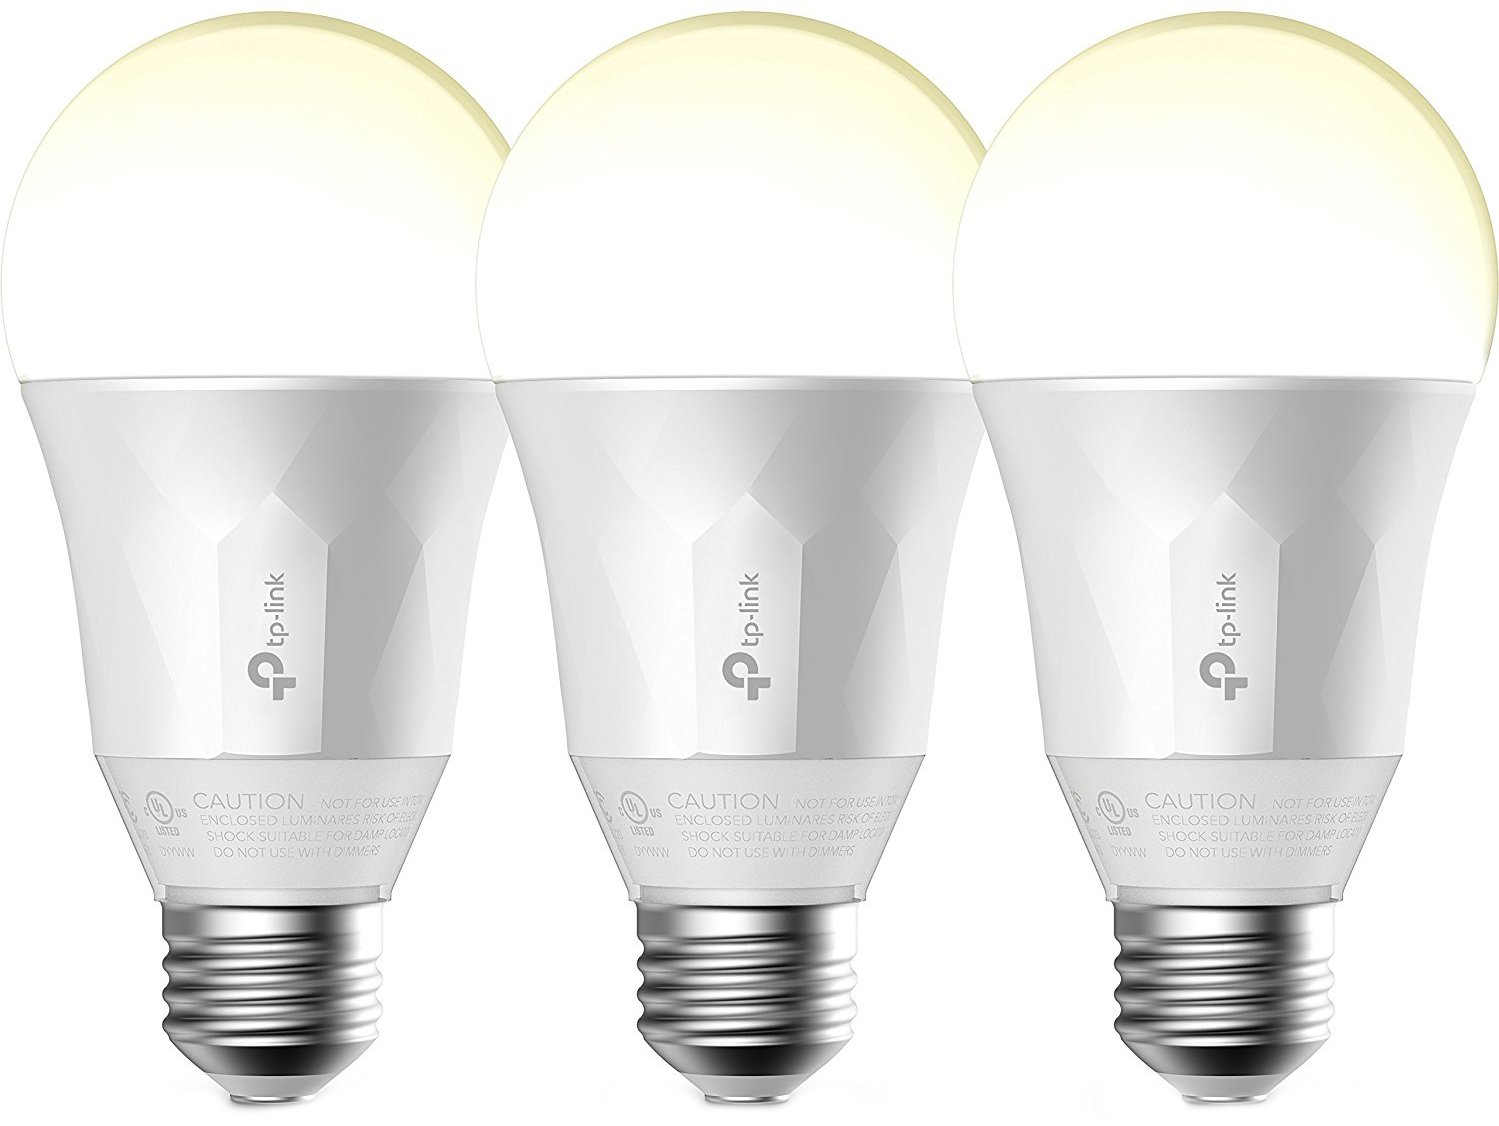 Best Smart LED Light Bulbs that Work with Google Home in 2019 | Android